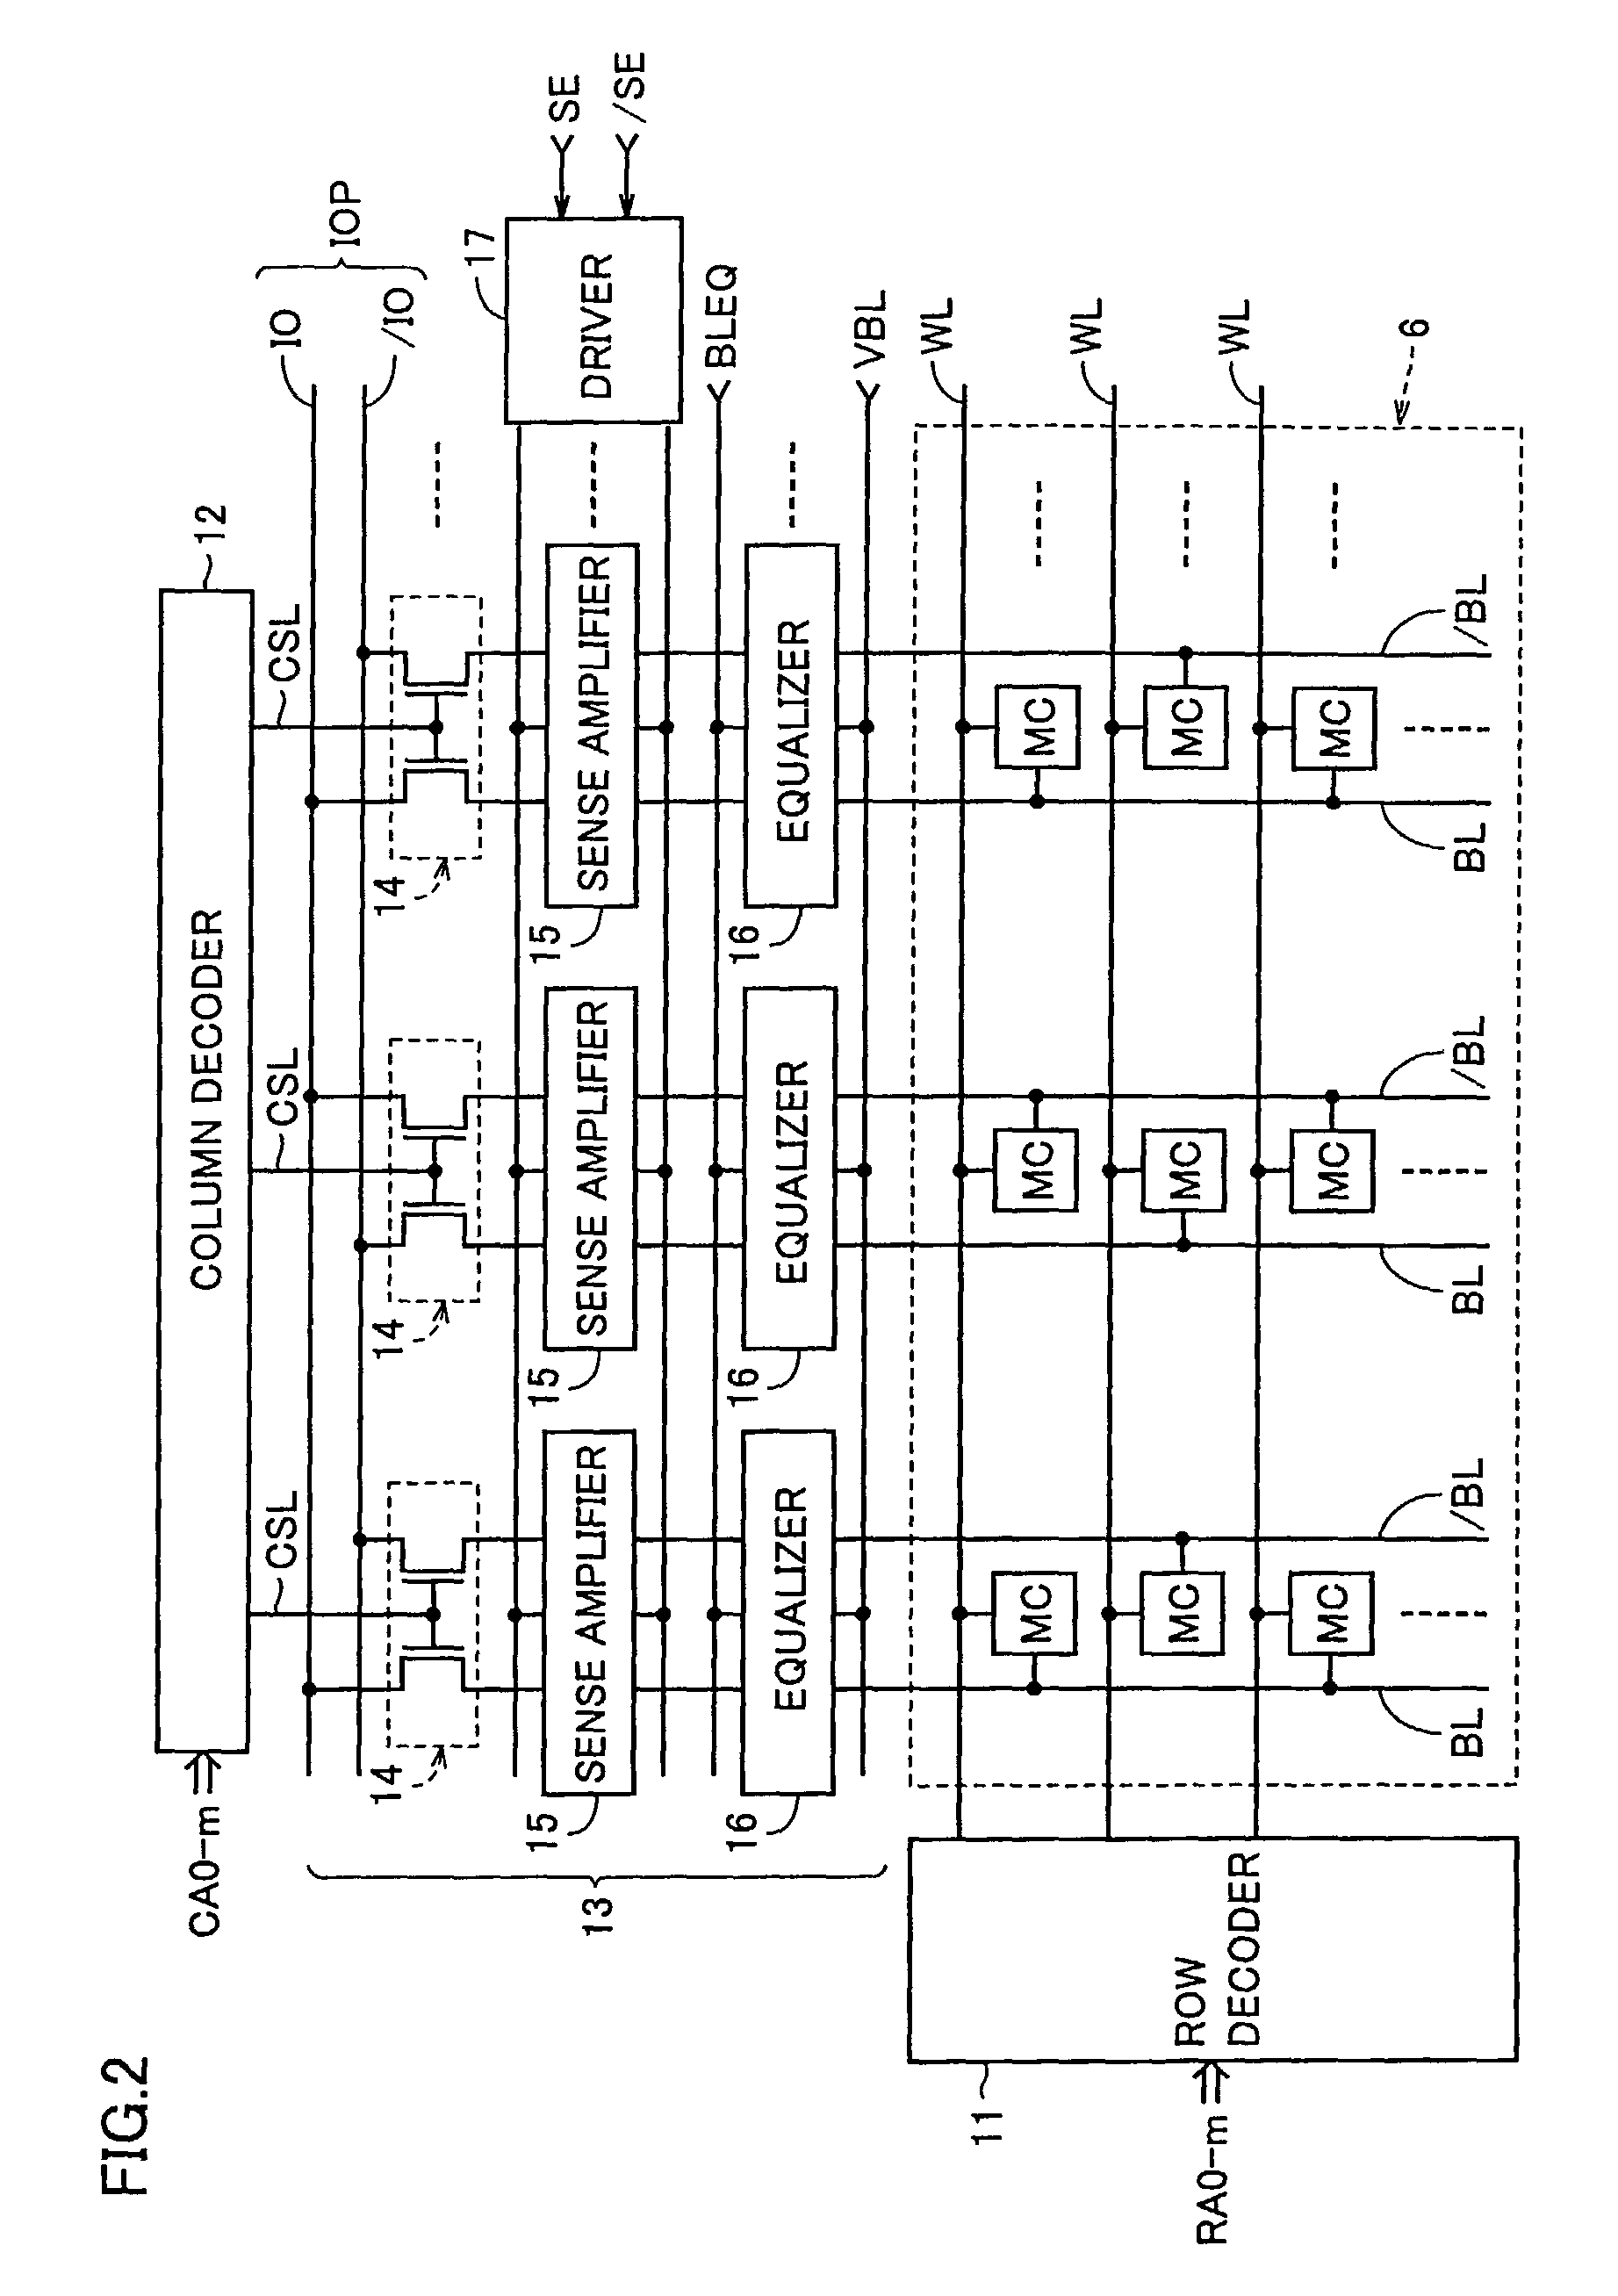 Semiconductor device having standby mode and active mode